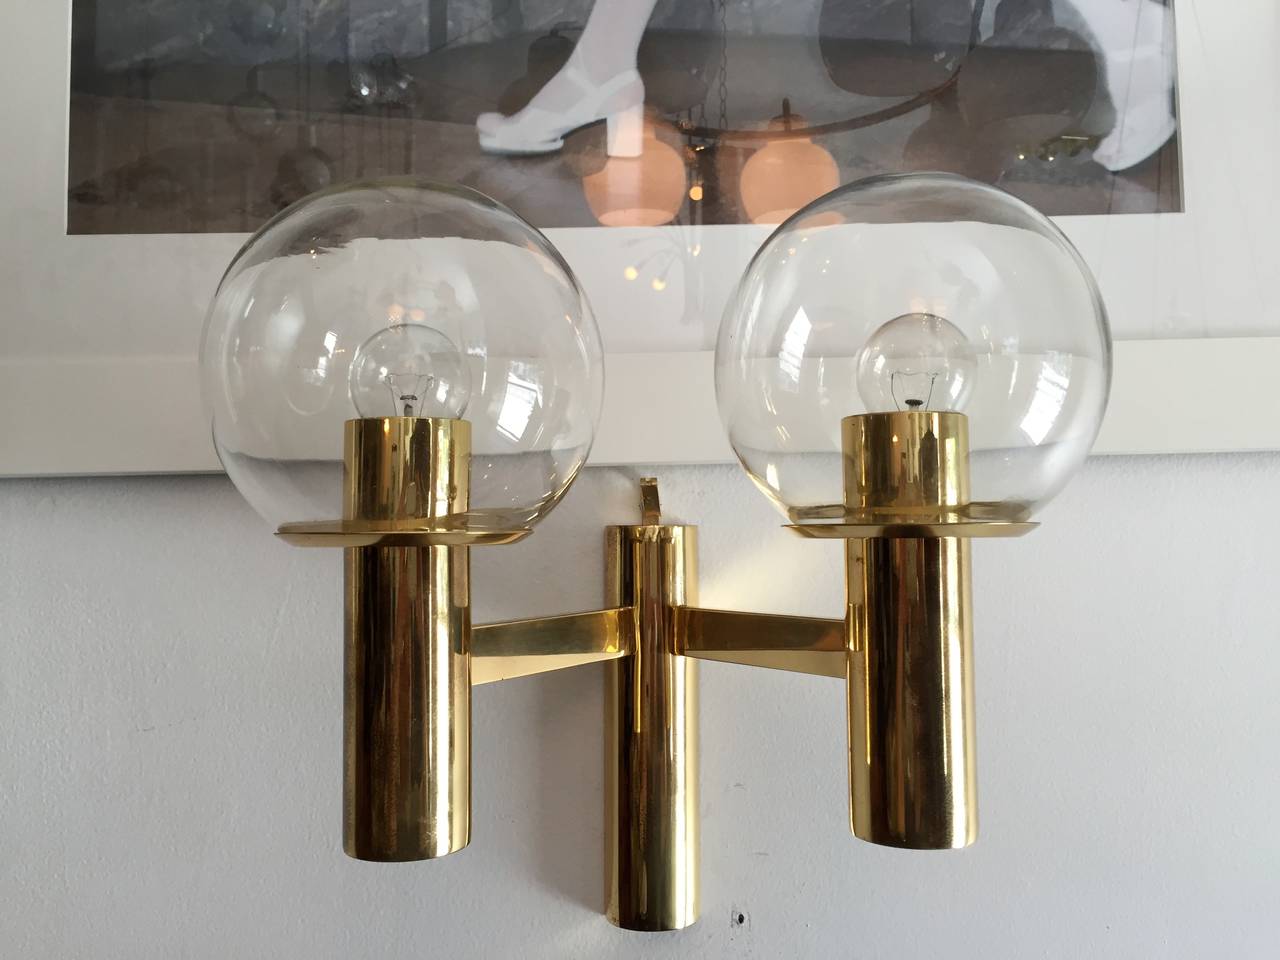 A pair of 1960s Swedish brass and glass globe sconces by Hans Agne Jakobsson. Rewired.